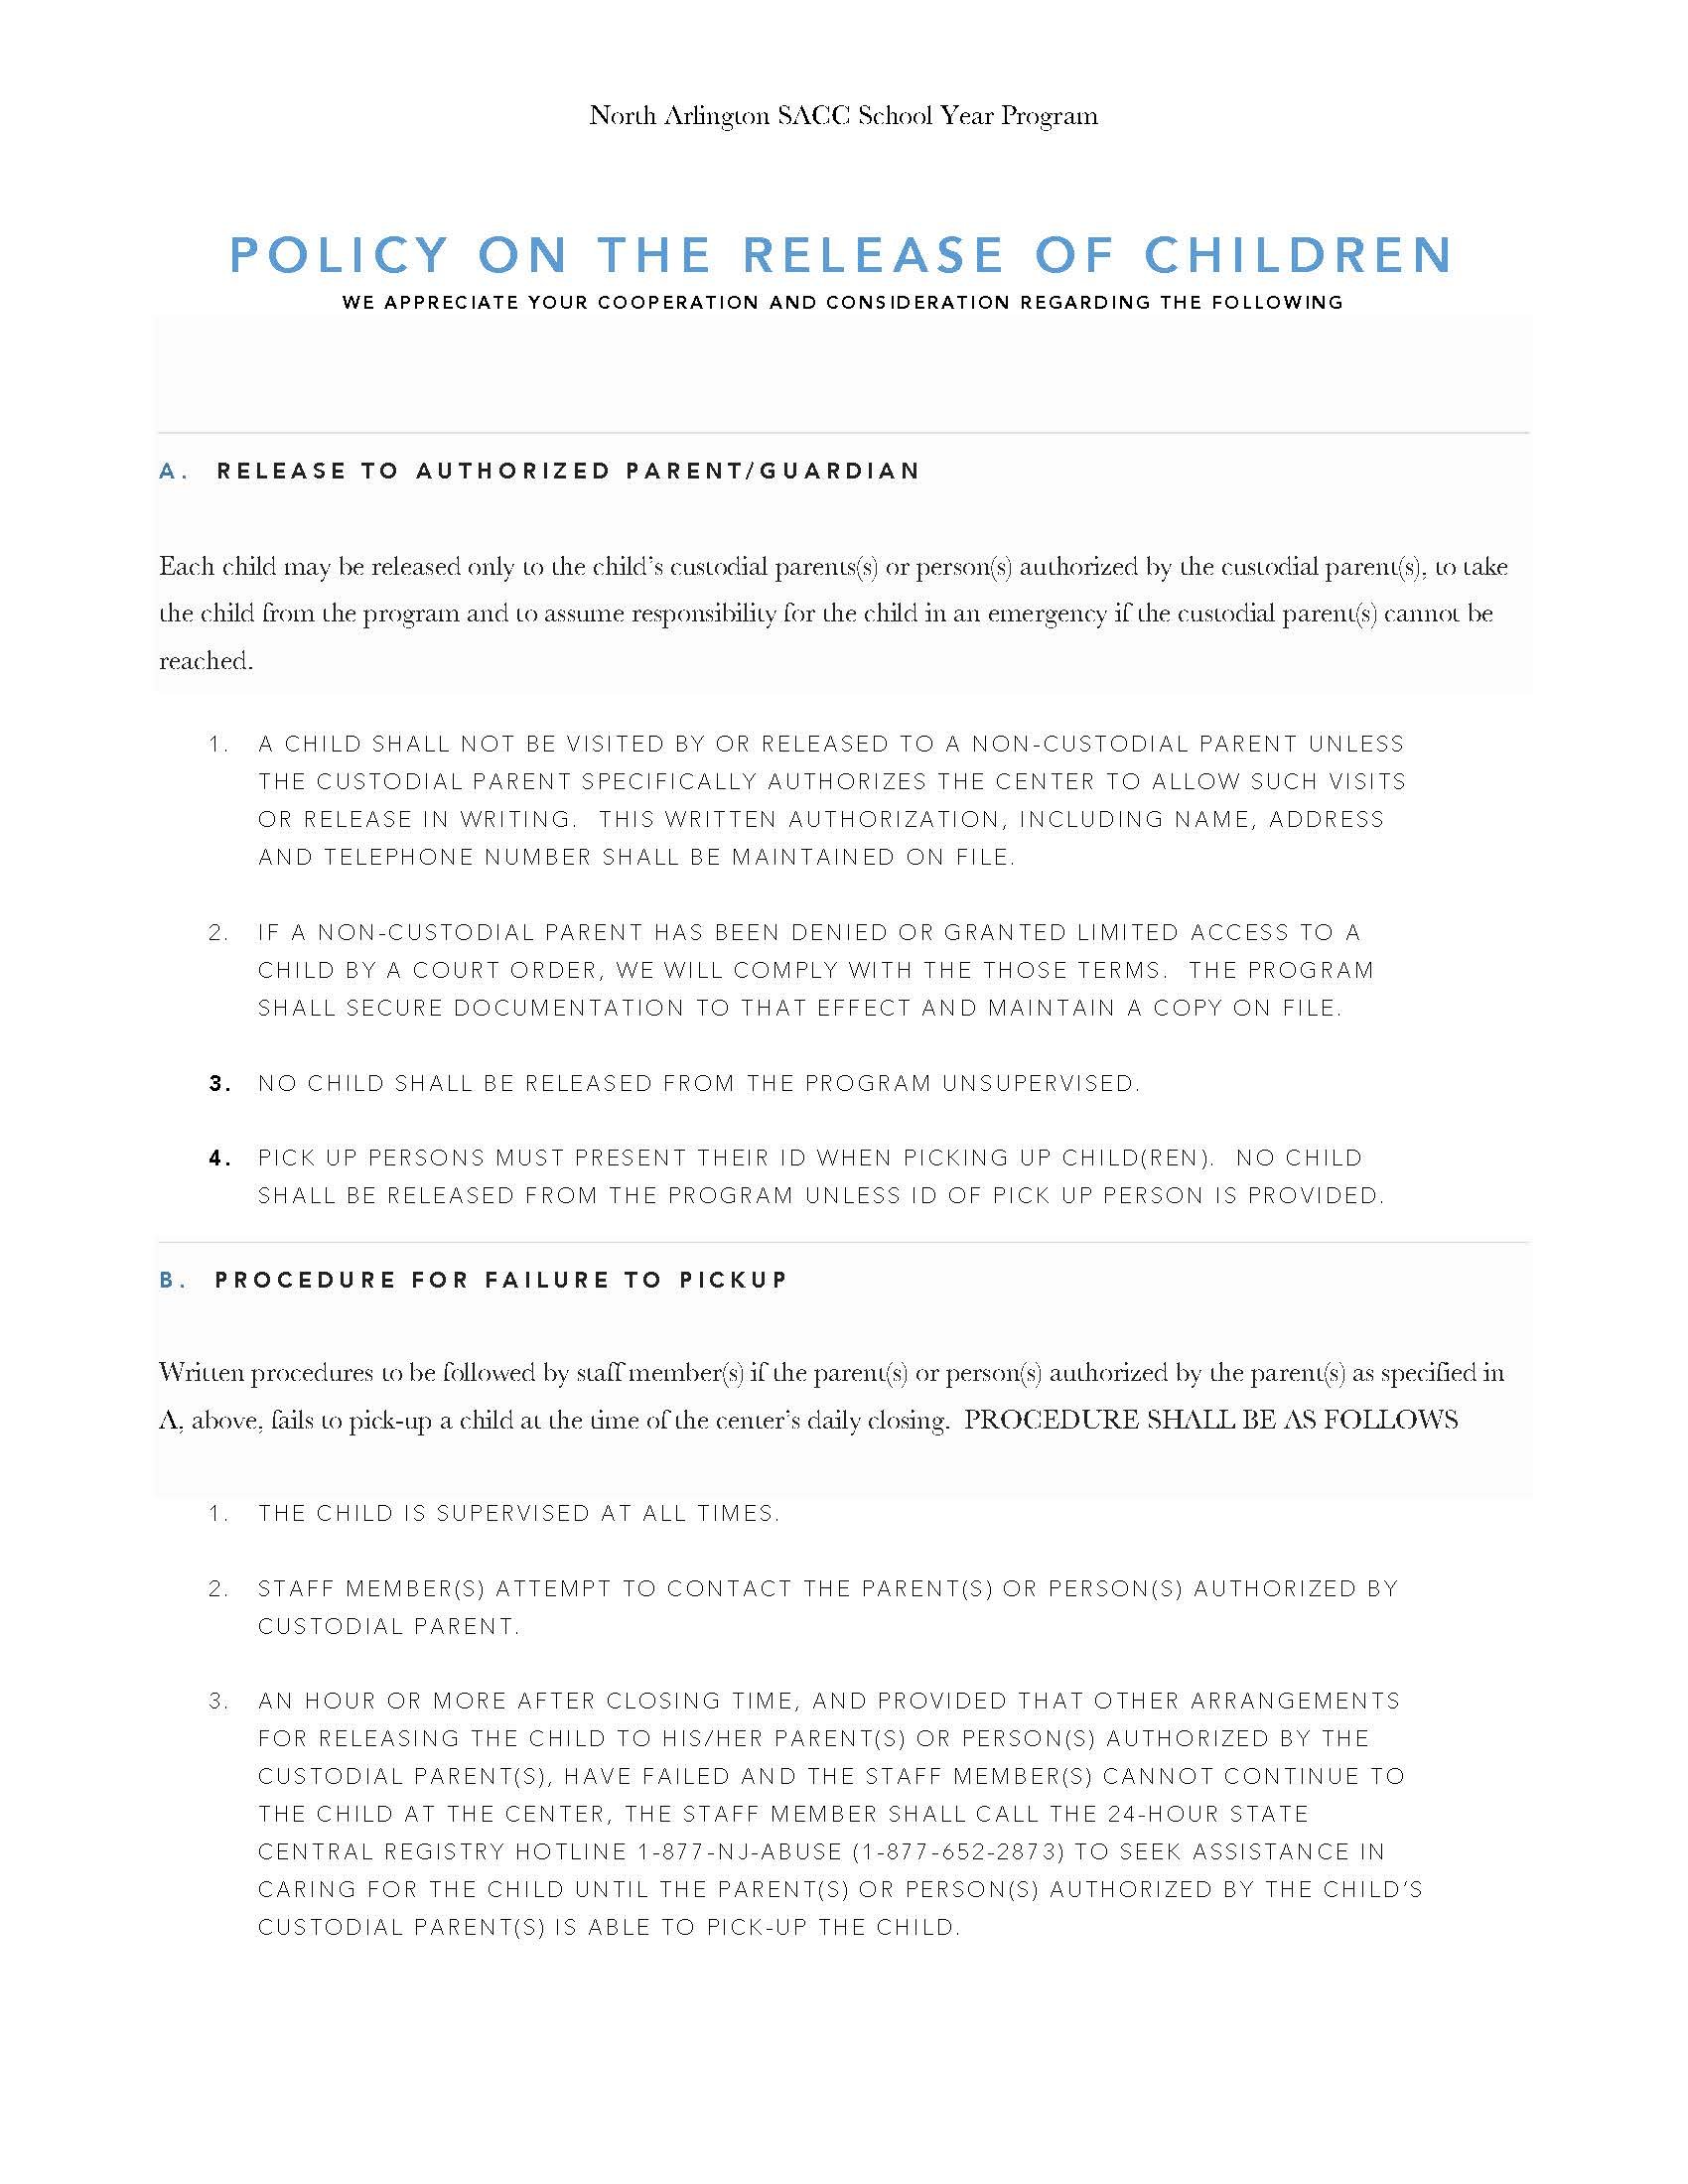 Policy on the Release of Children